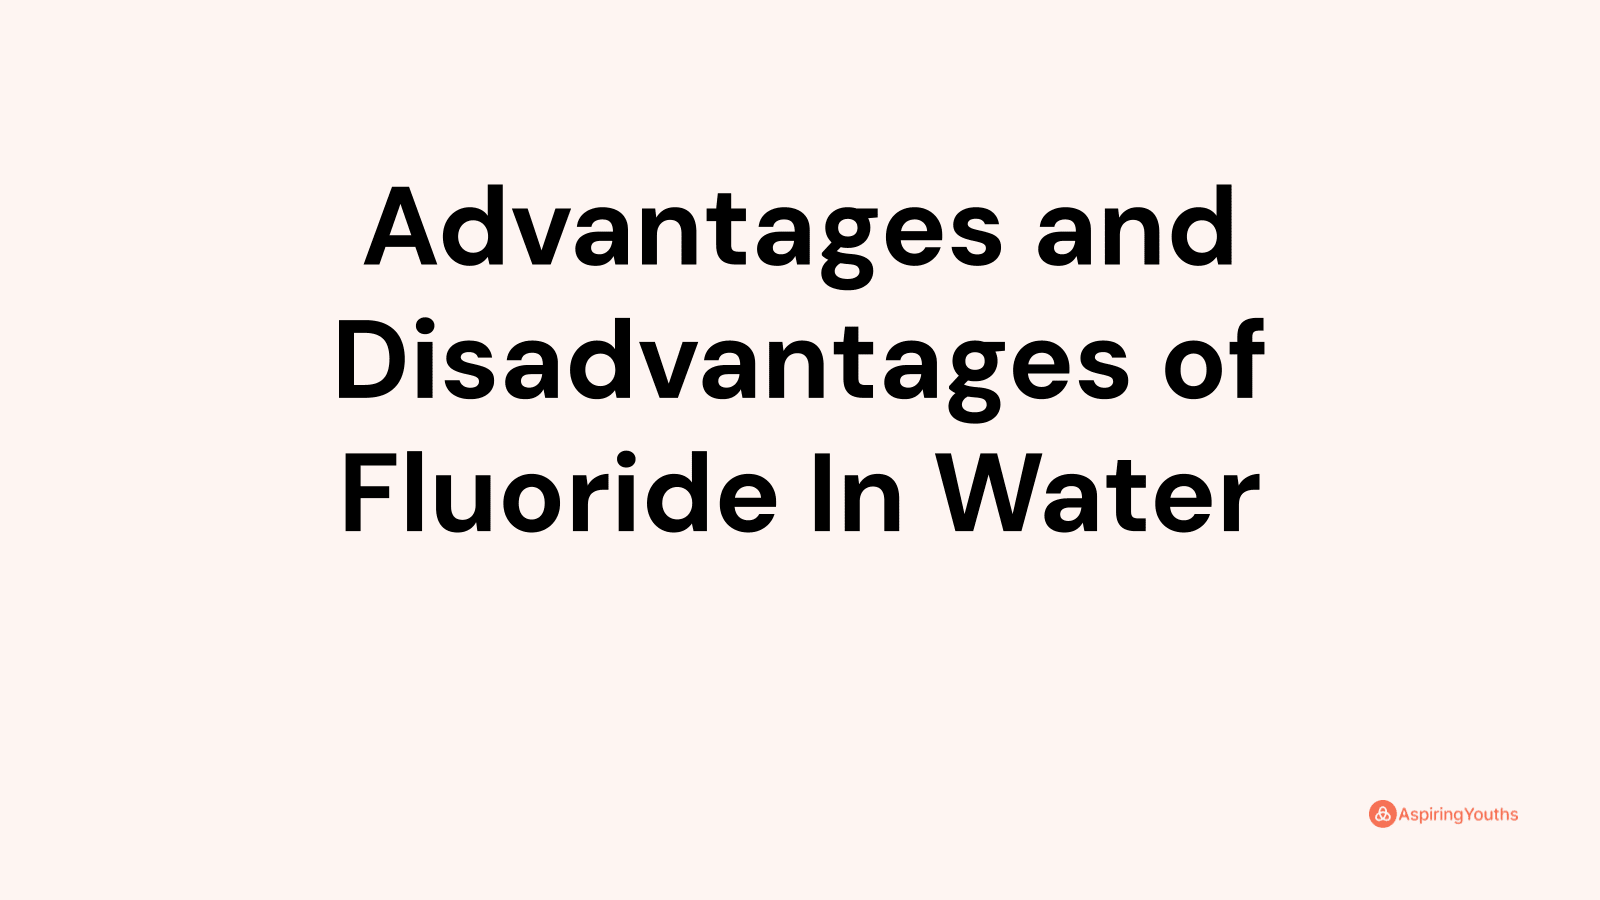 Advantages and disadvantages of Fluoride In Water